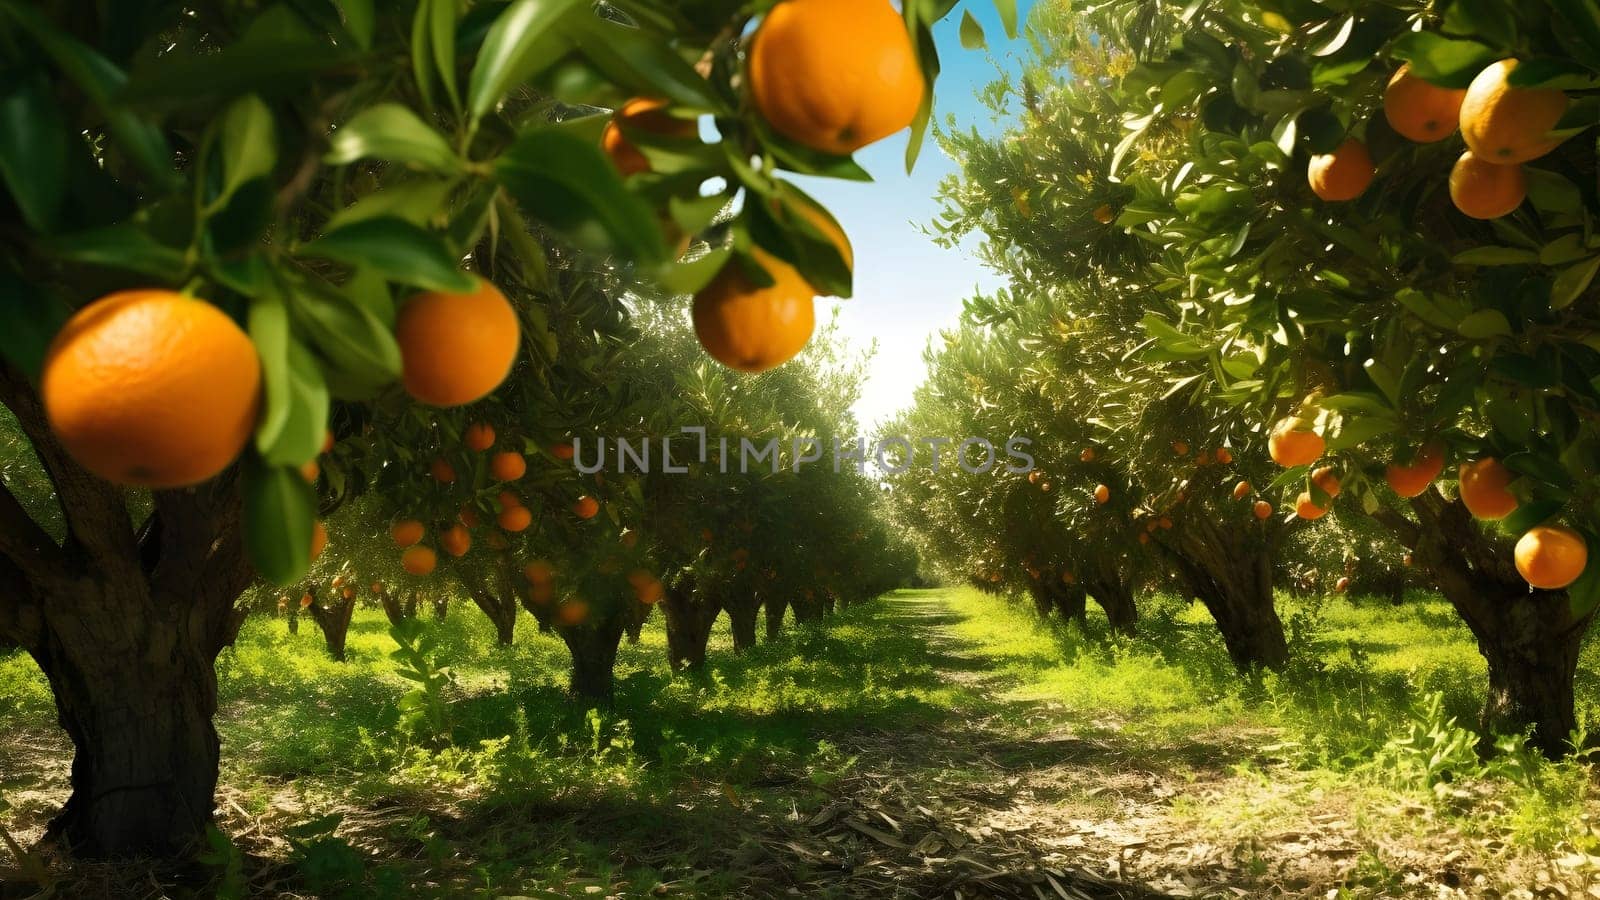 Oranges Ripening at Agriculture Farm at sunny summer day. Neural network generated in May 2023. Not based on any actual person, scene or pattern.